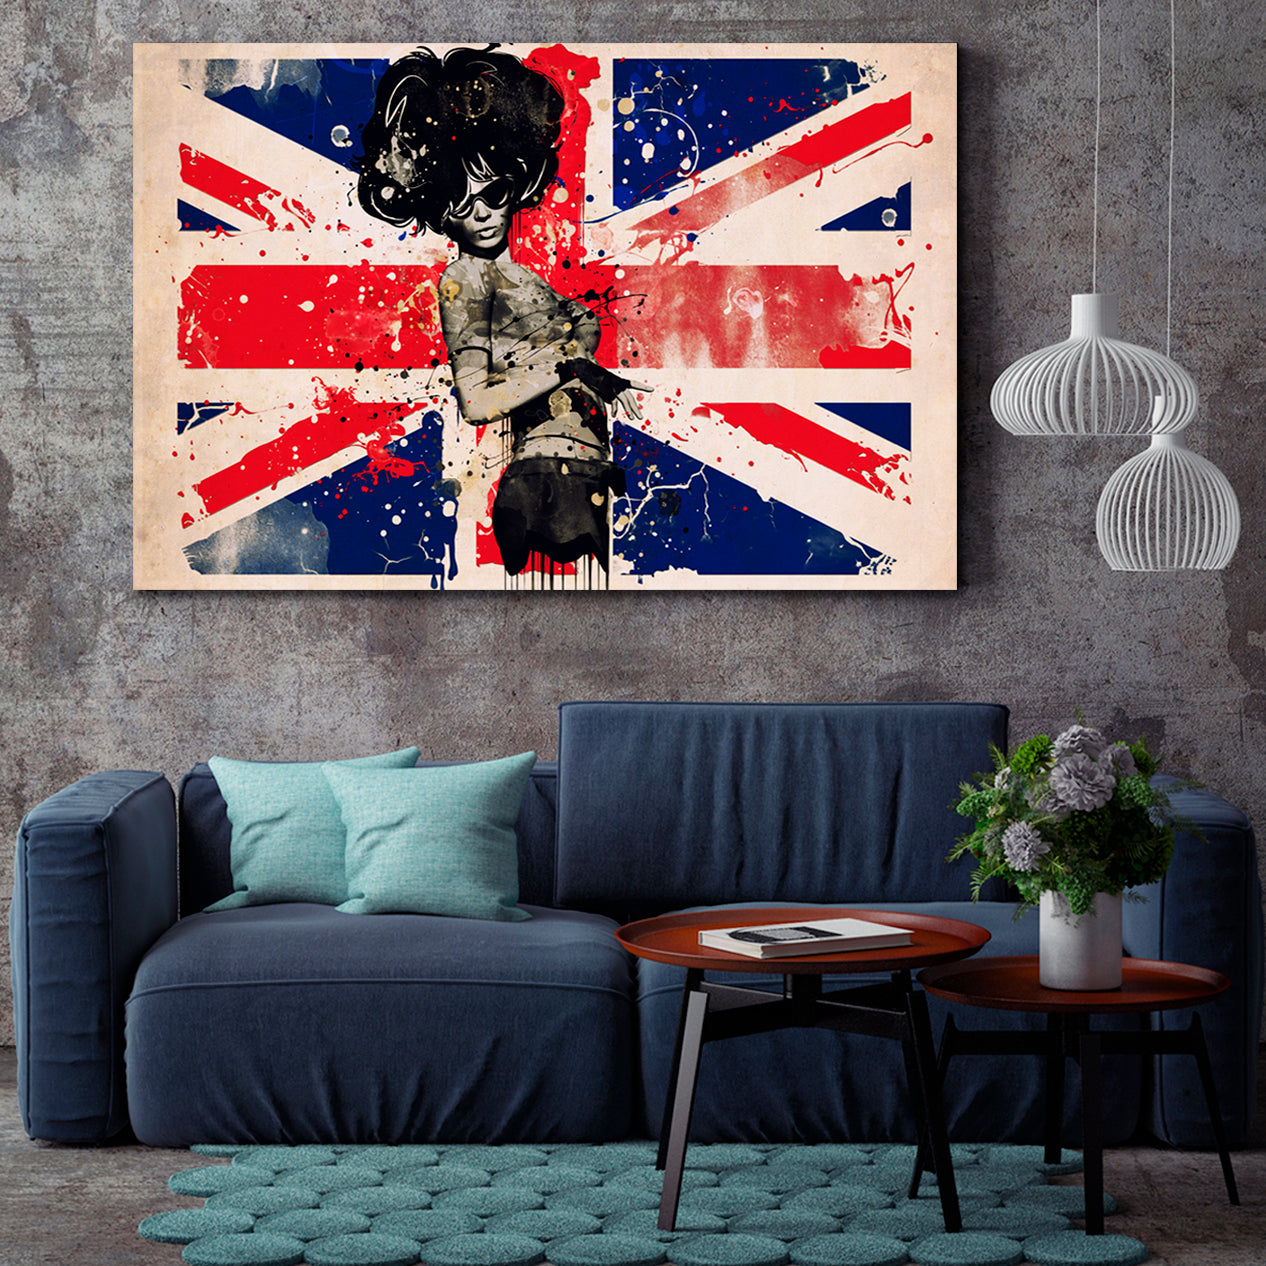 Fashion Woman British Flag Modern Grunge Style Posters, Flags Giclee Print Artesty   